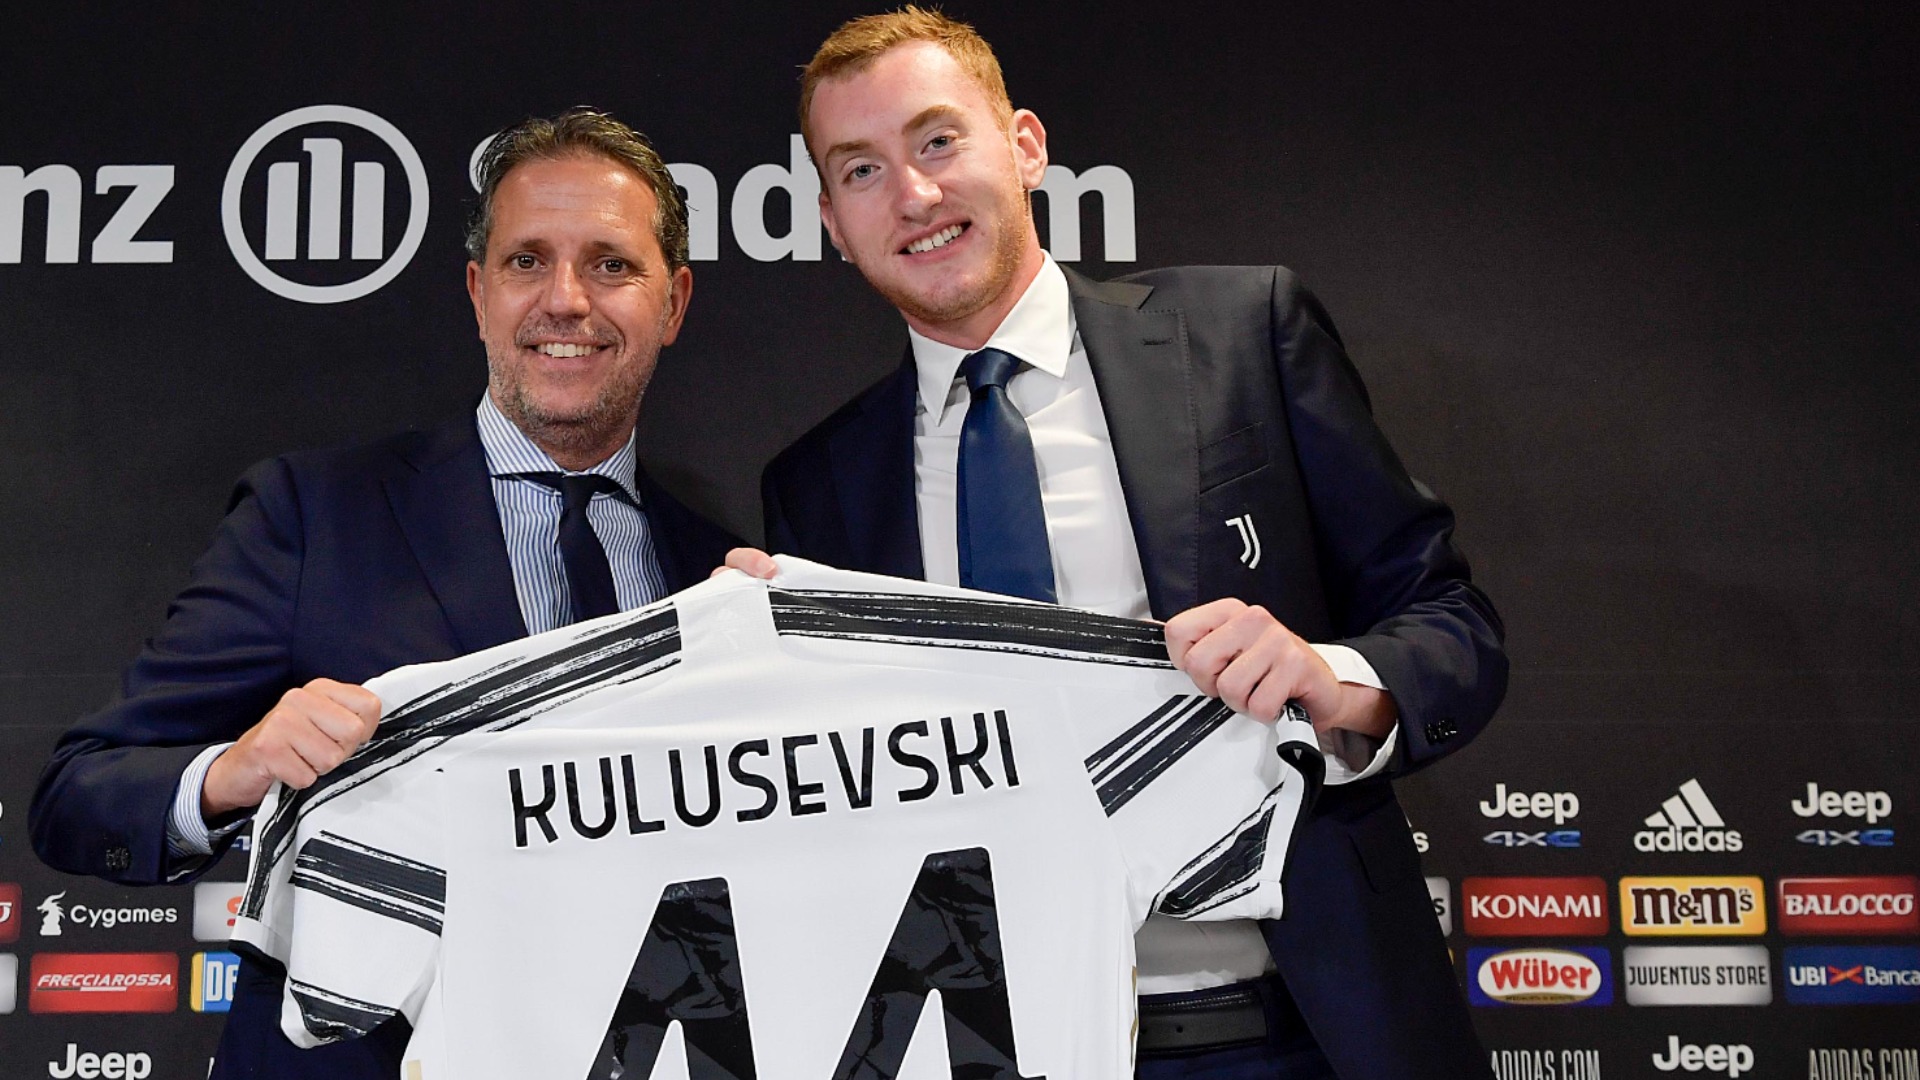 Next Generation – Kulusevski's youth coaches outline the perfect pupil as Juventus bow awaits